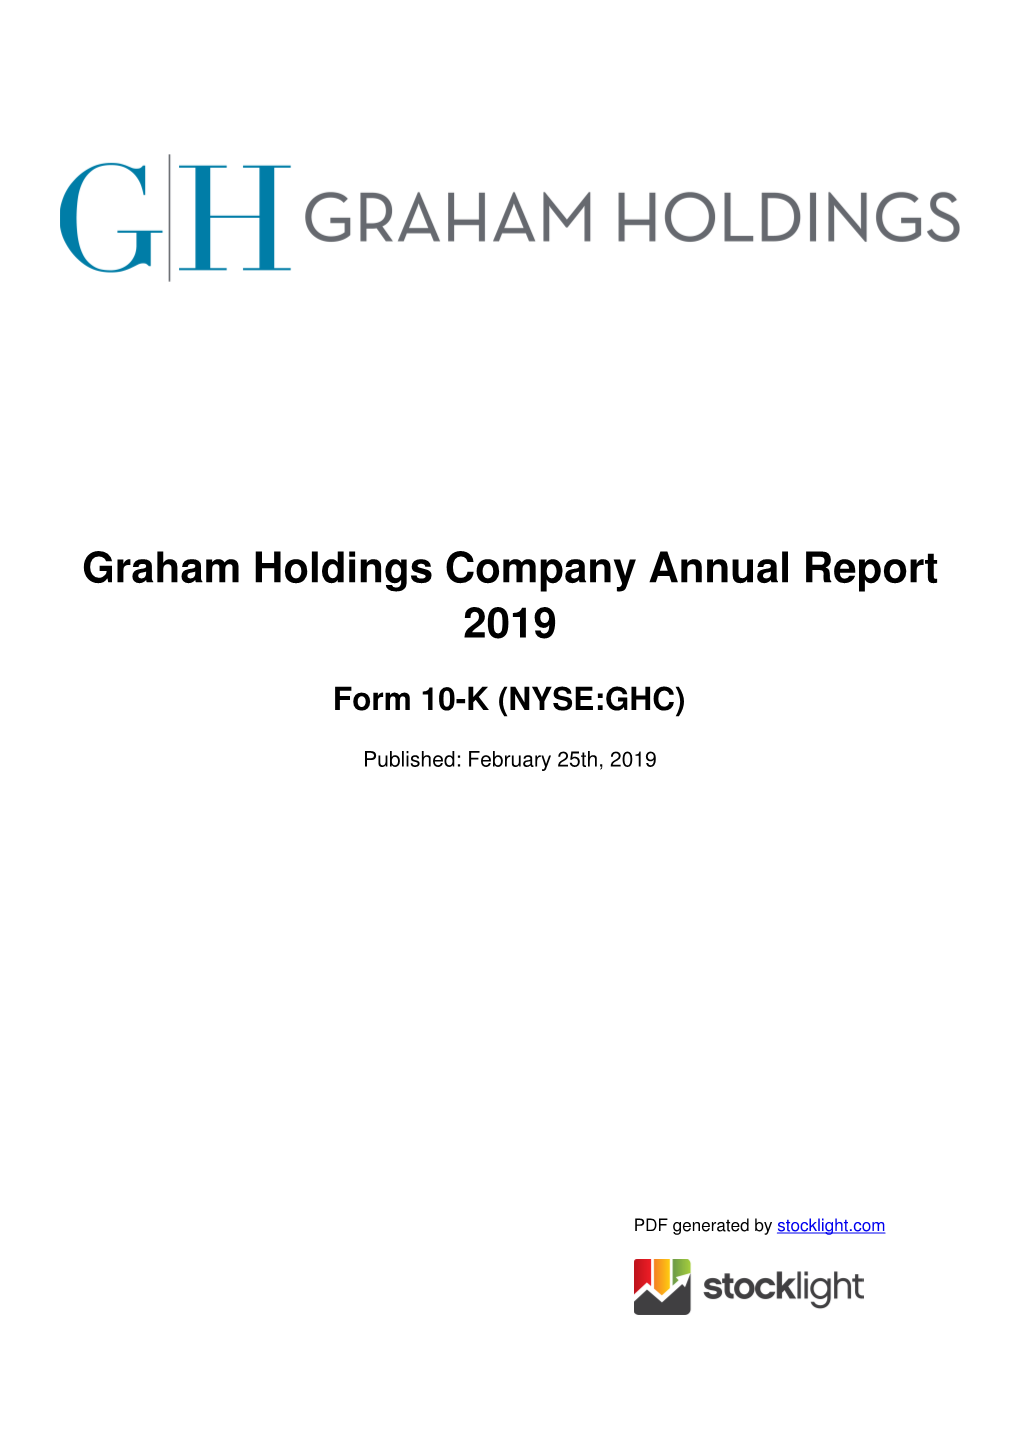 Graham Holdings Company Annual Report 2019